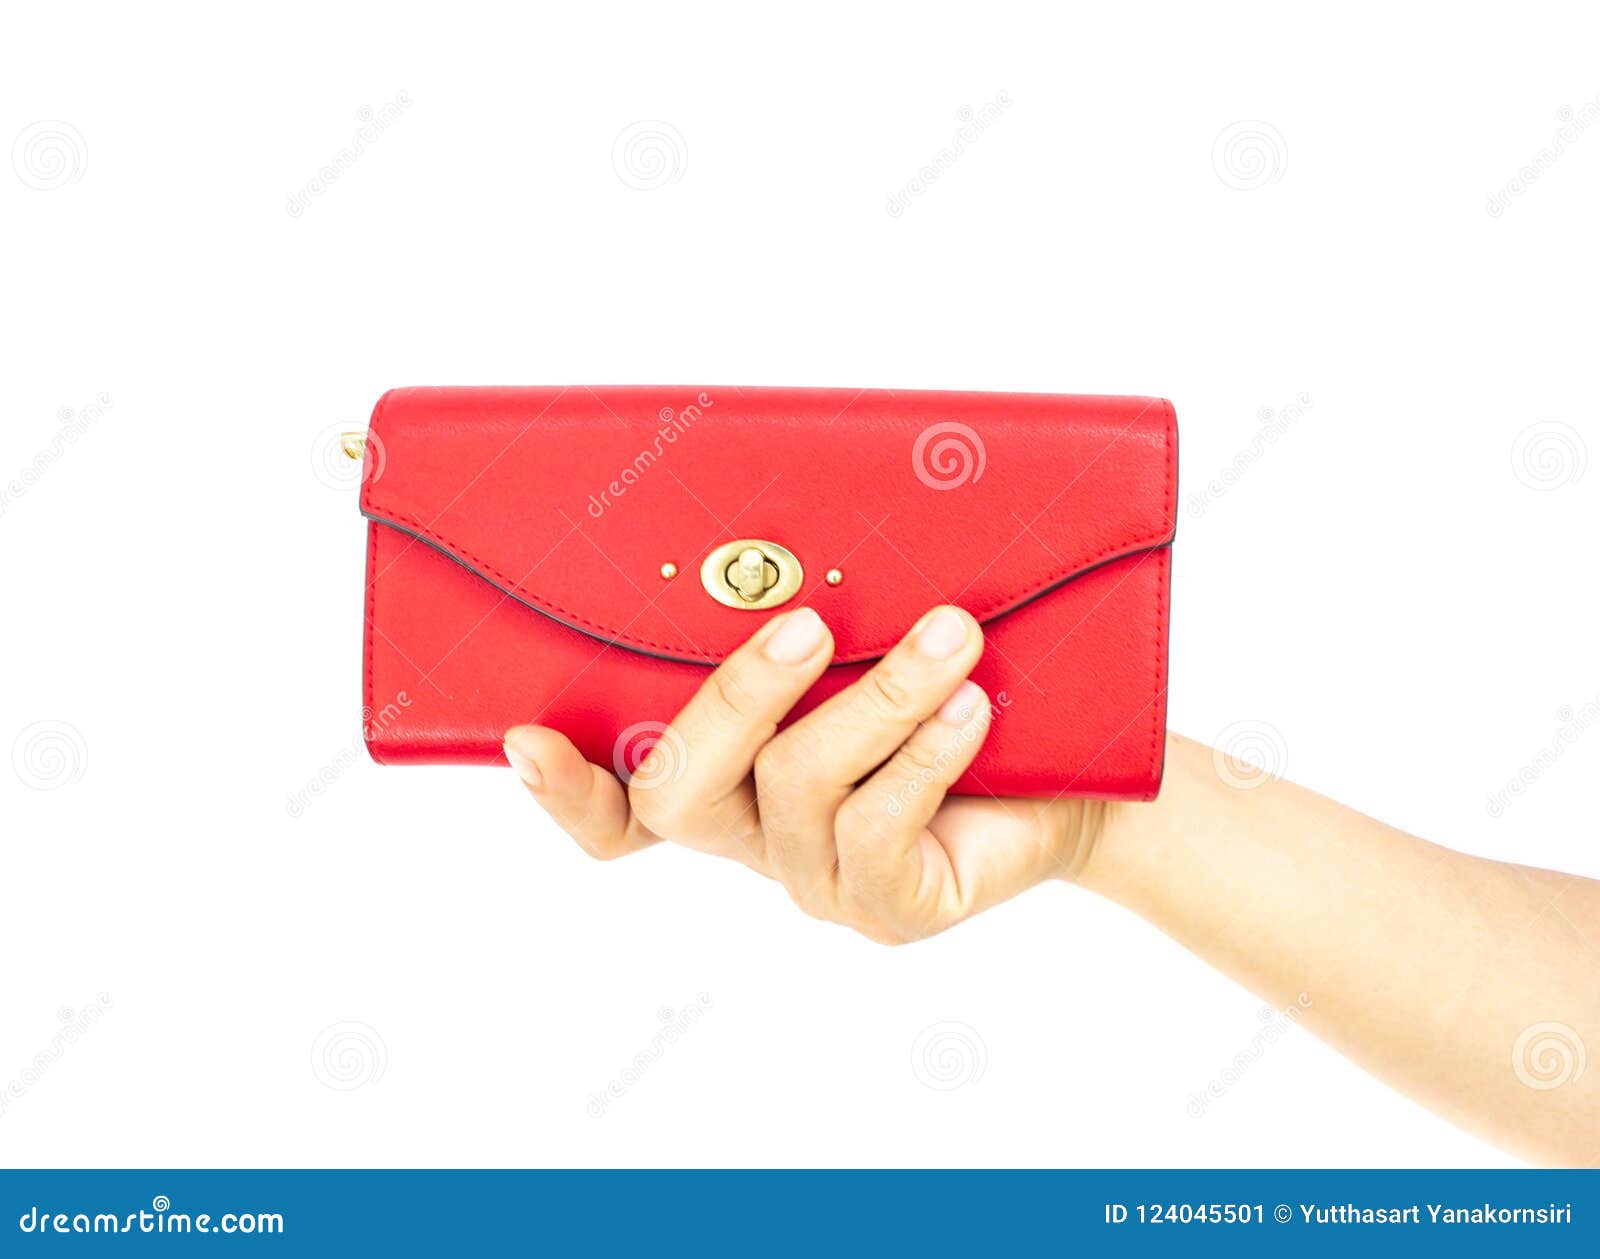 Red Leather Wallet in Female Hand Stock Image - Image of isolated ...